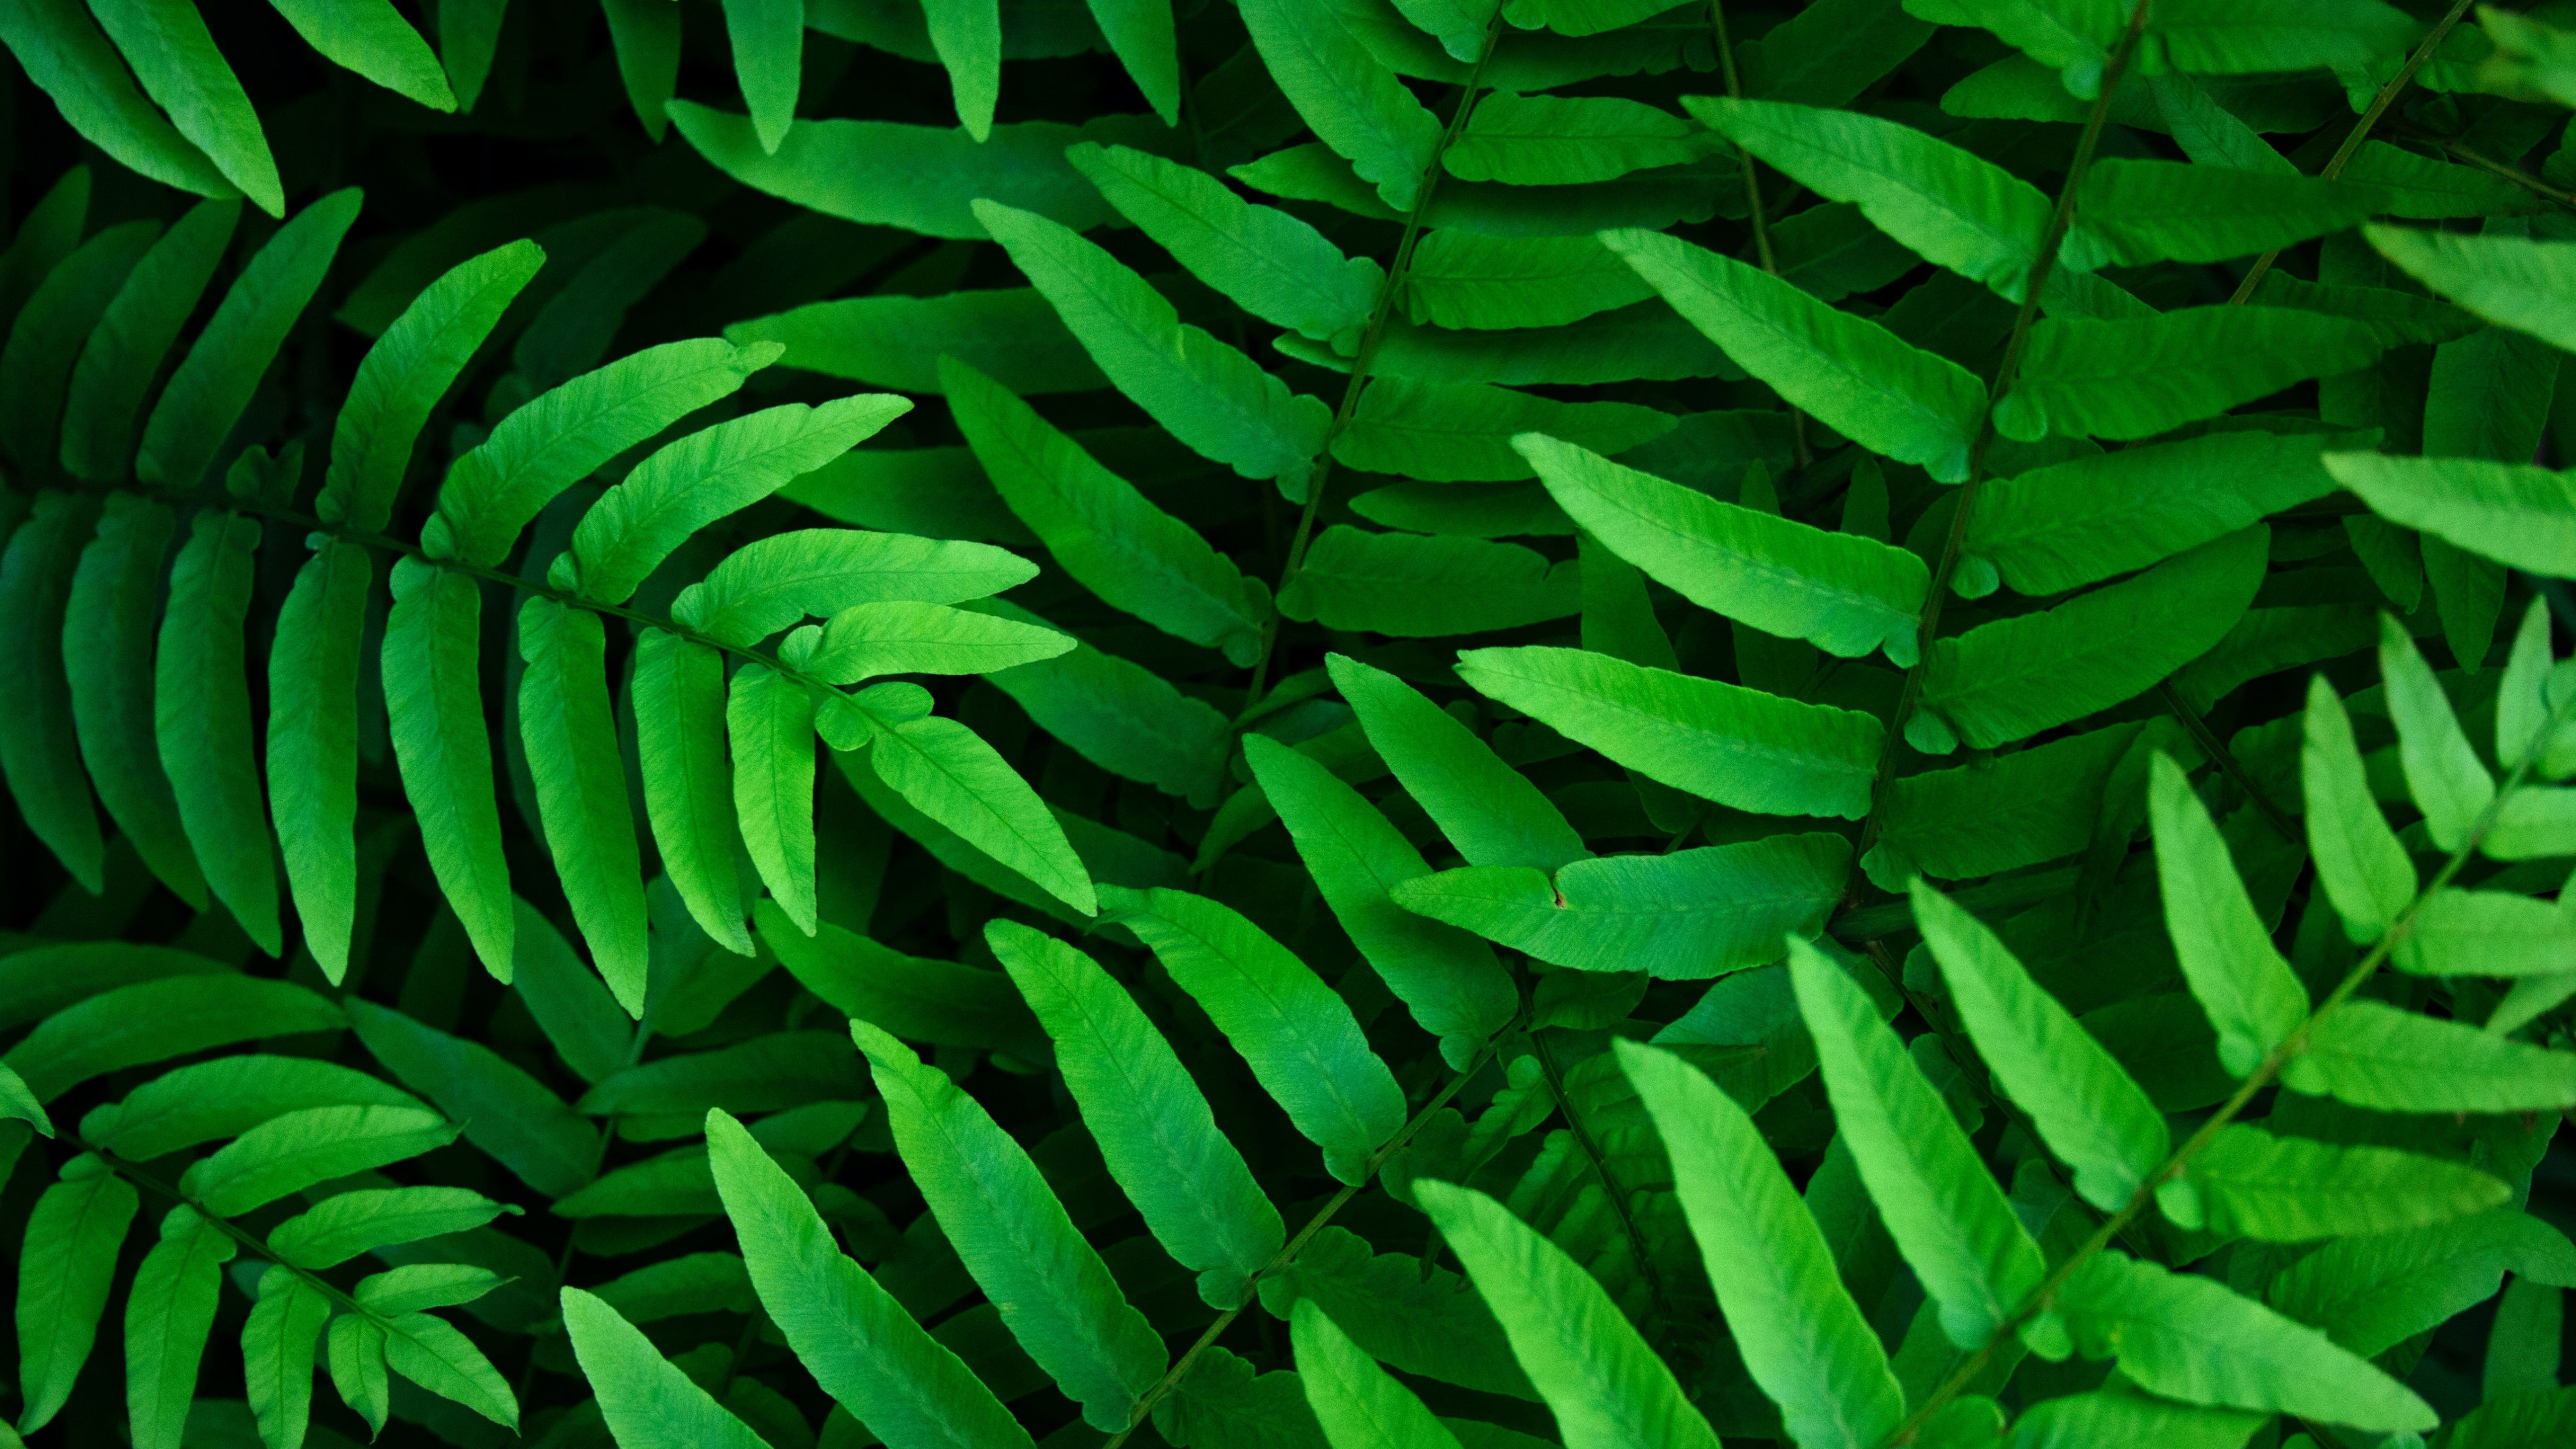 A fern with green leaves. - Leaves